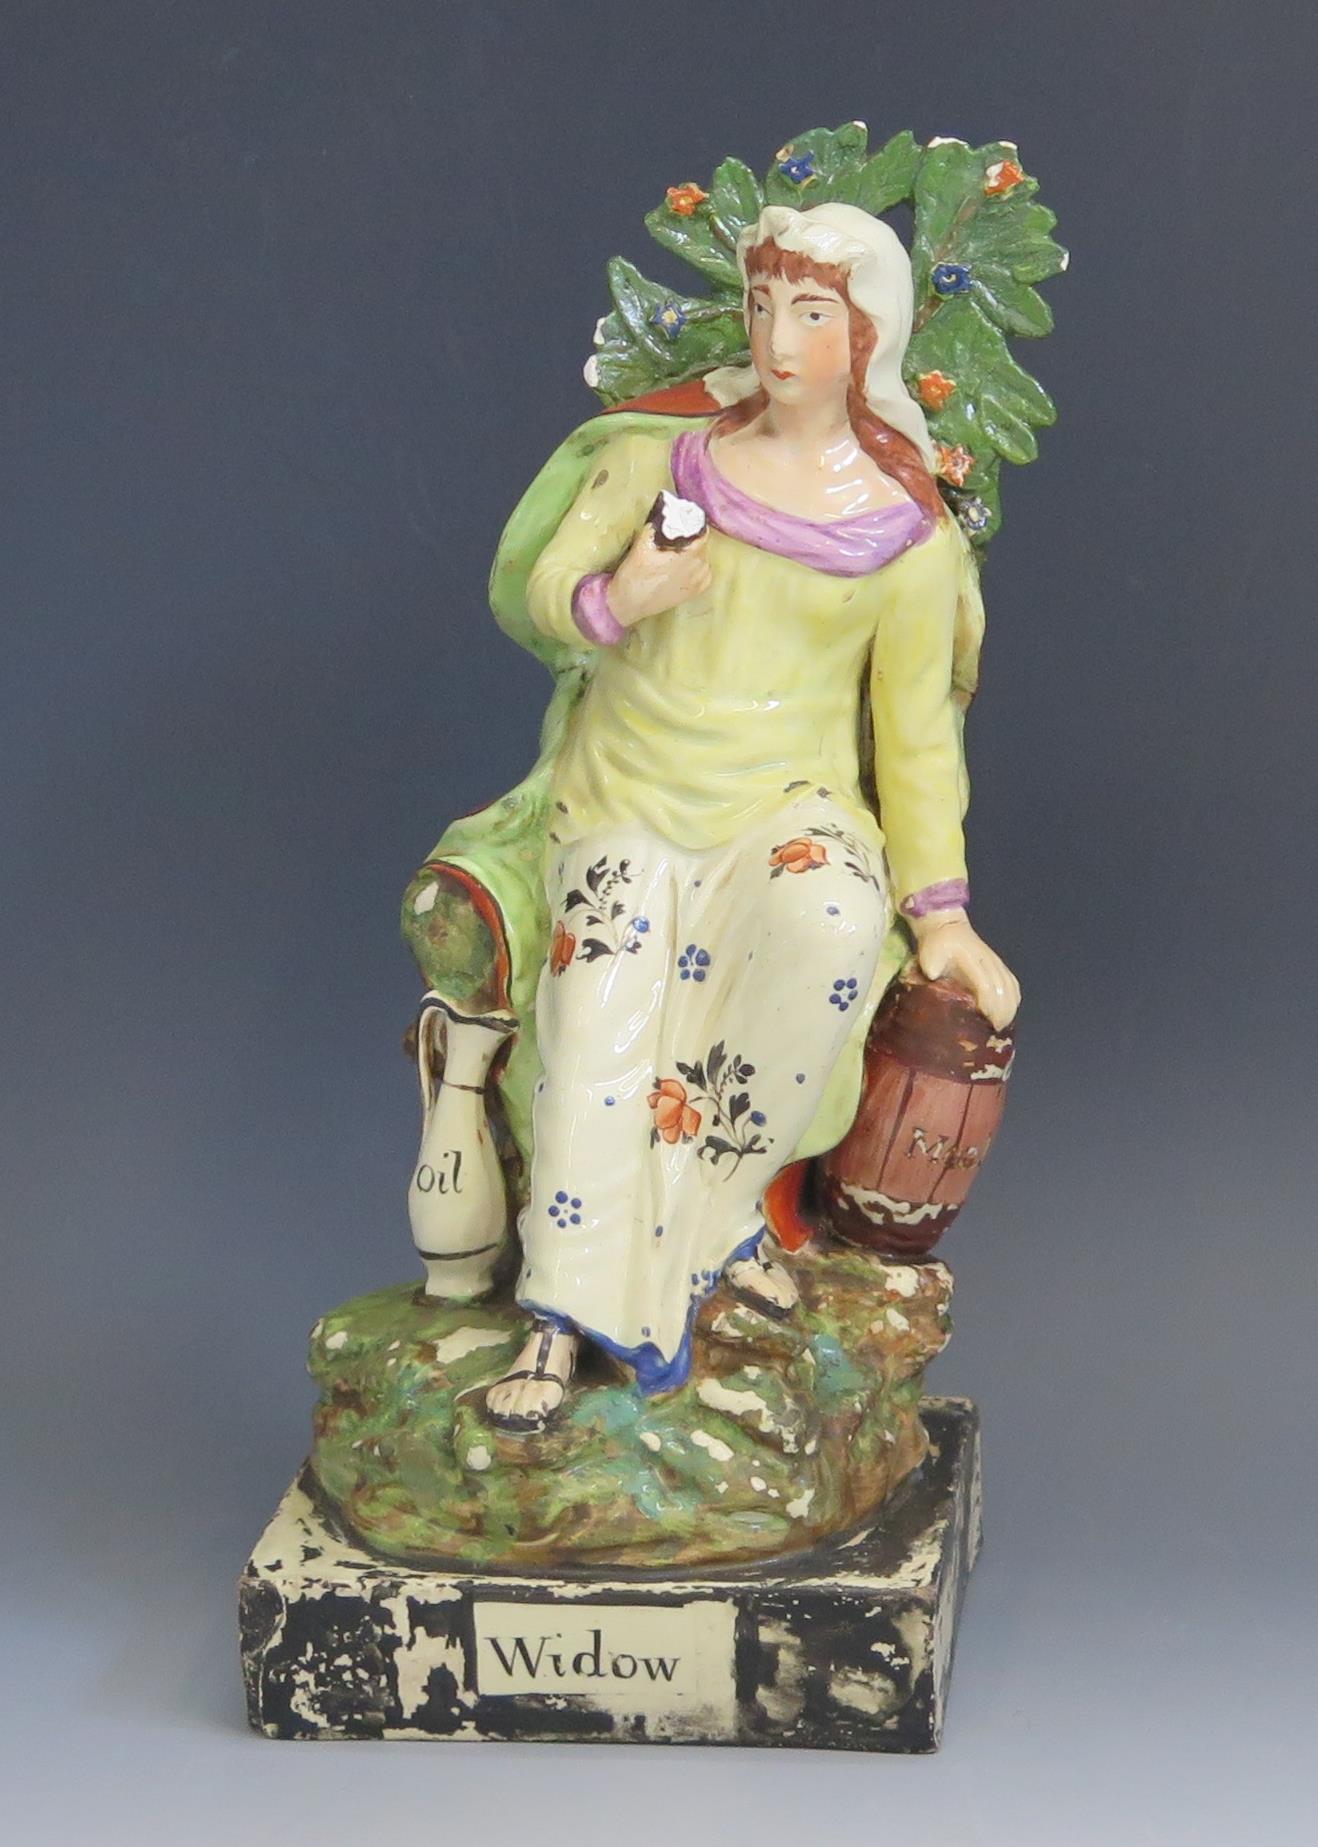 A Staffordshire pottery pearlware figure 'Widow' 26cm high. Chips to the foliage and loss of